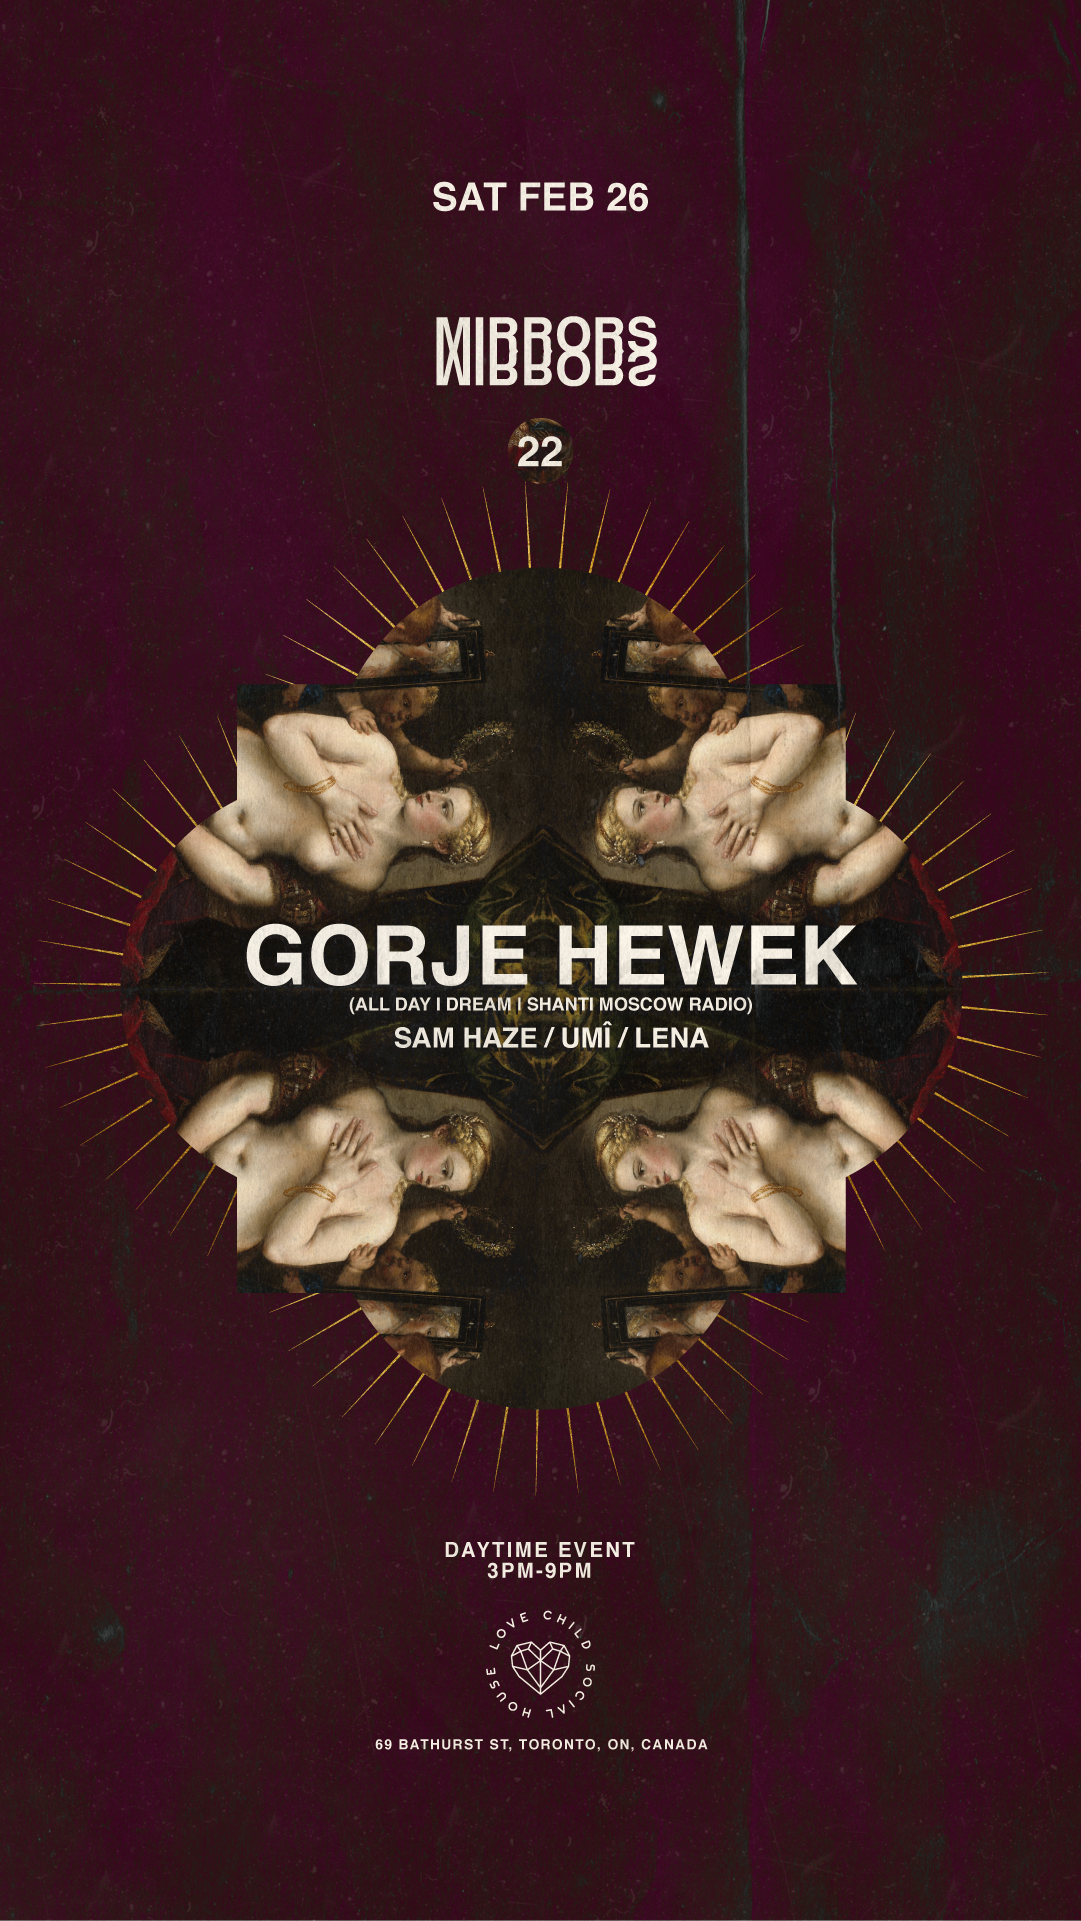 Mirrors ⋄⋄ 22 with Gorje Hewek at Love Child Social House, Toronto